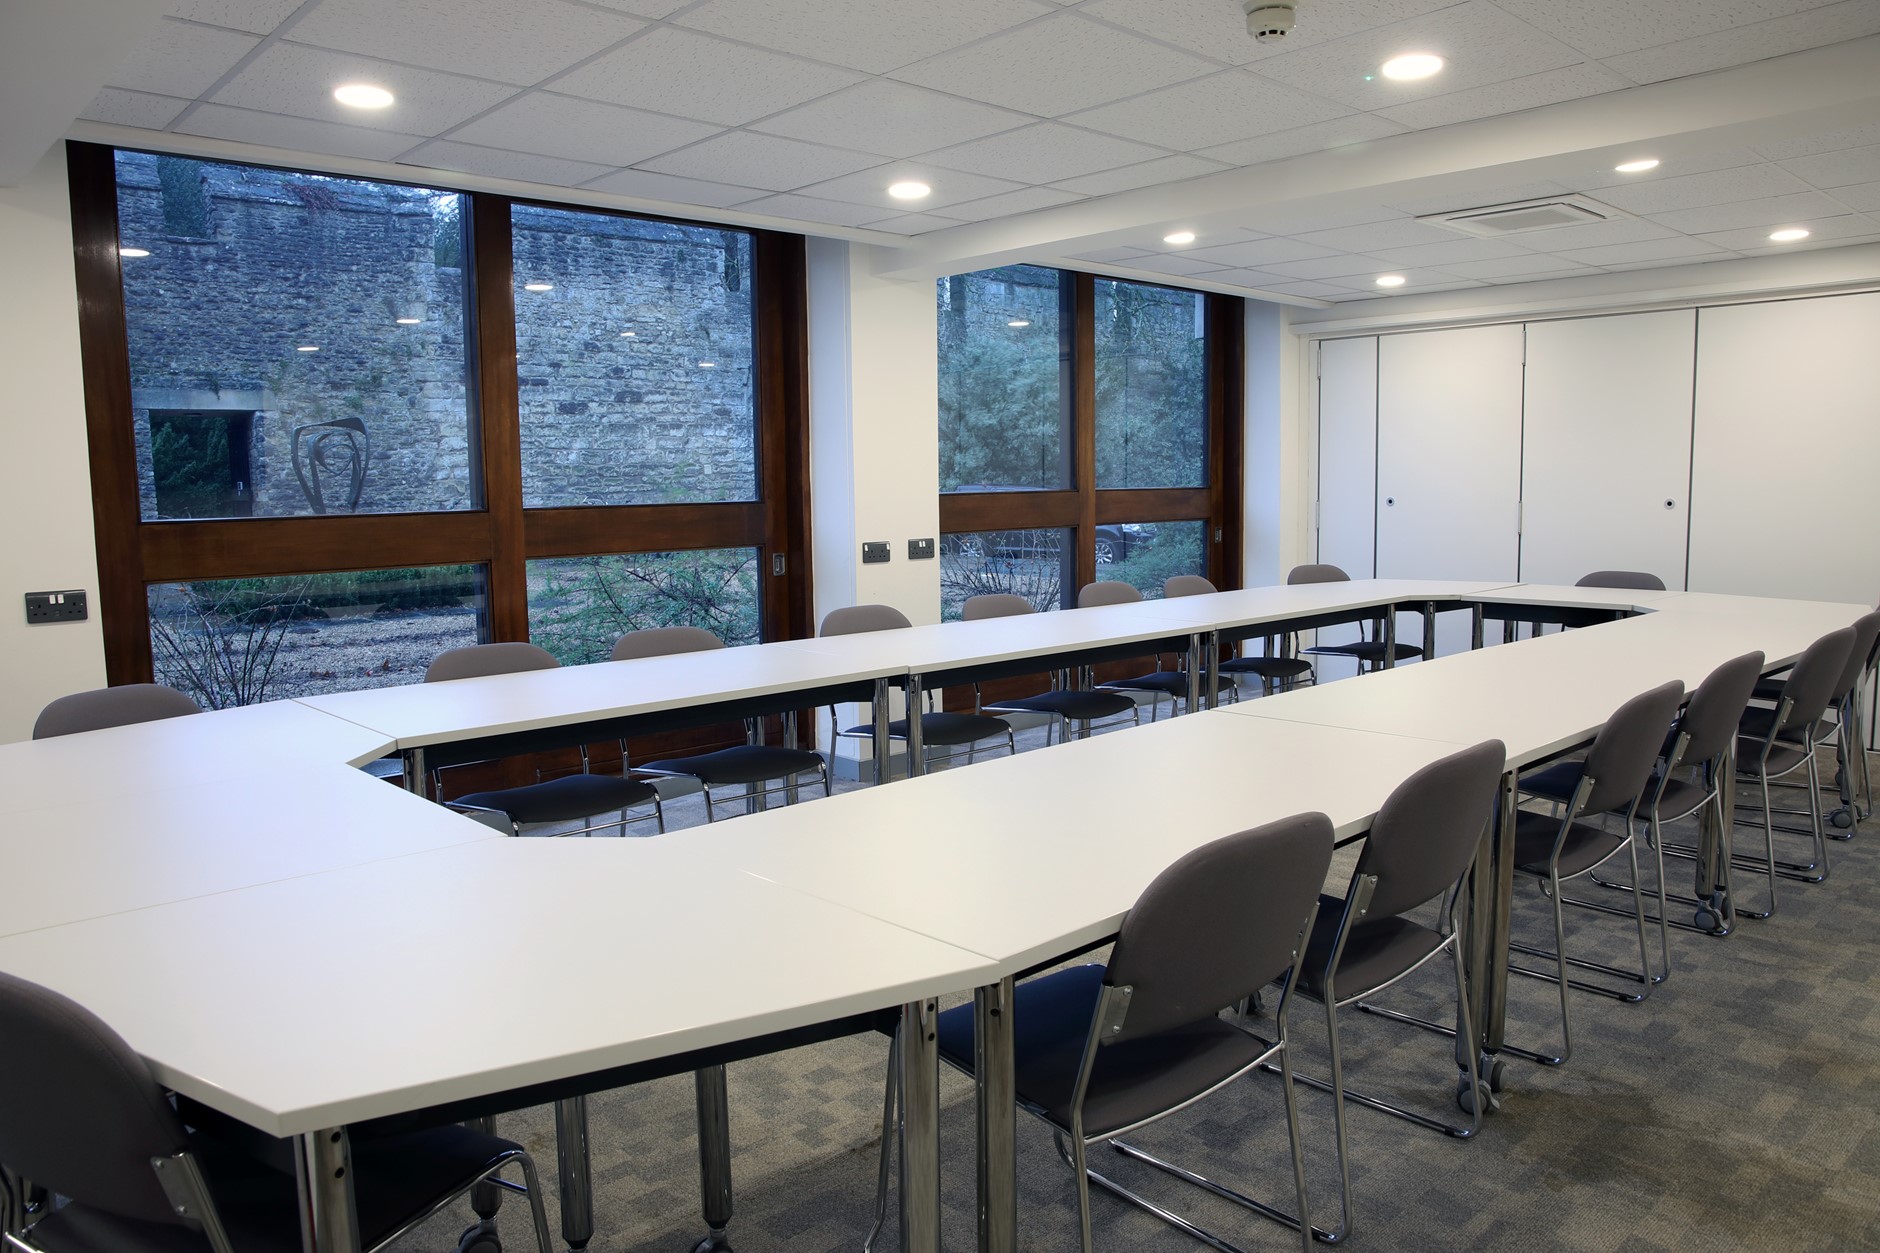 Spooner Room 1 - a boardroom meeting room with a view of the Oxford city wall